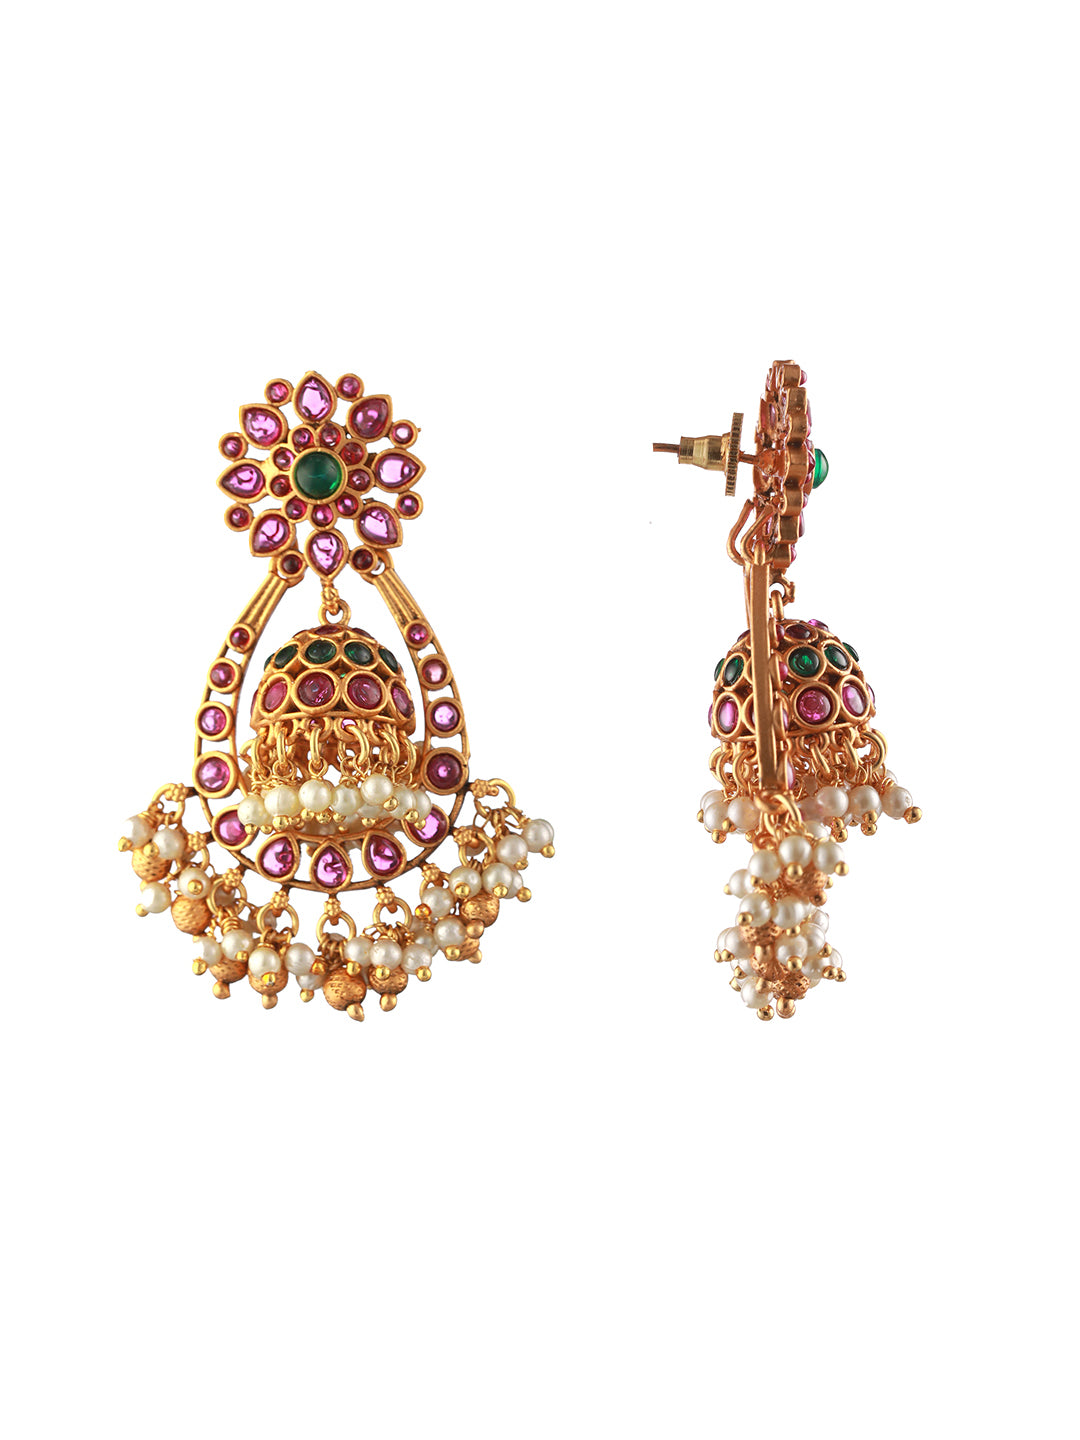 Floral Kemp Stone Studded Pearl Gold-Plated Jhumka Earrings